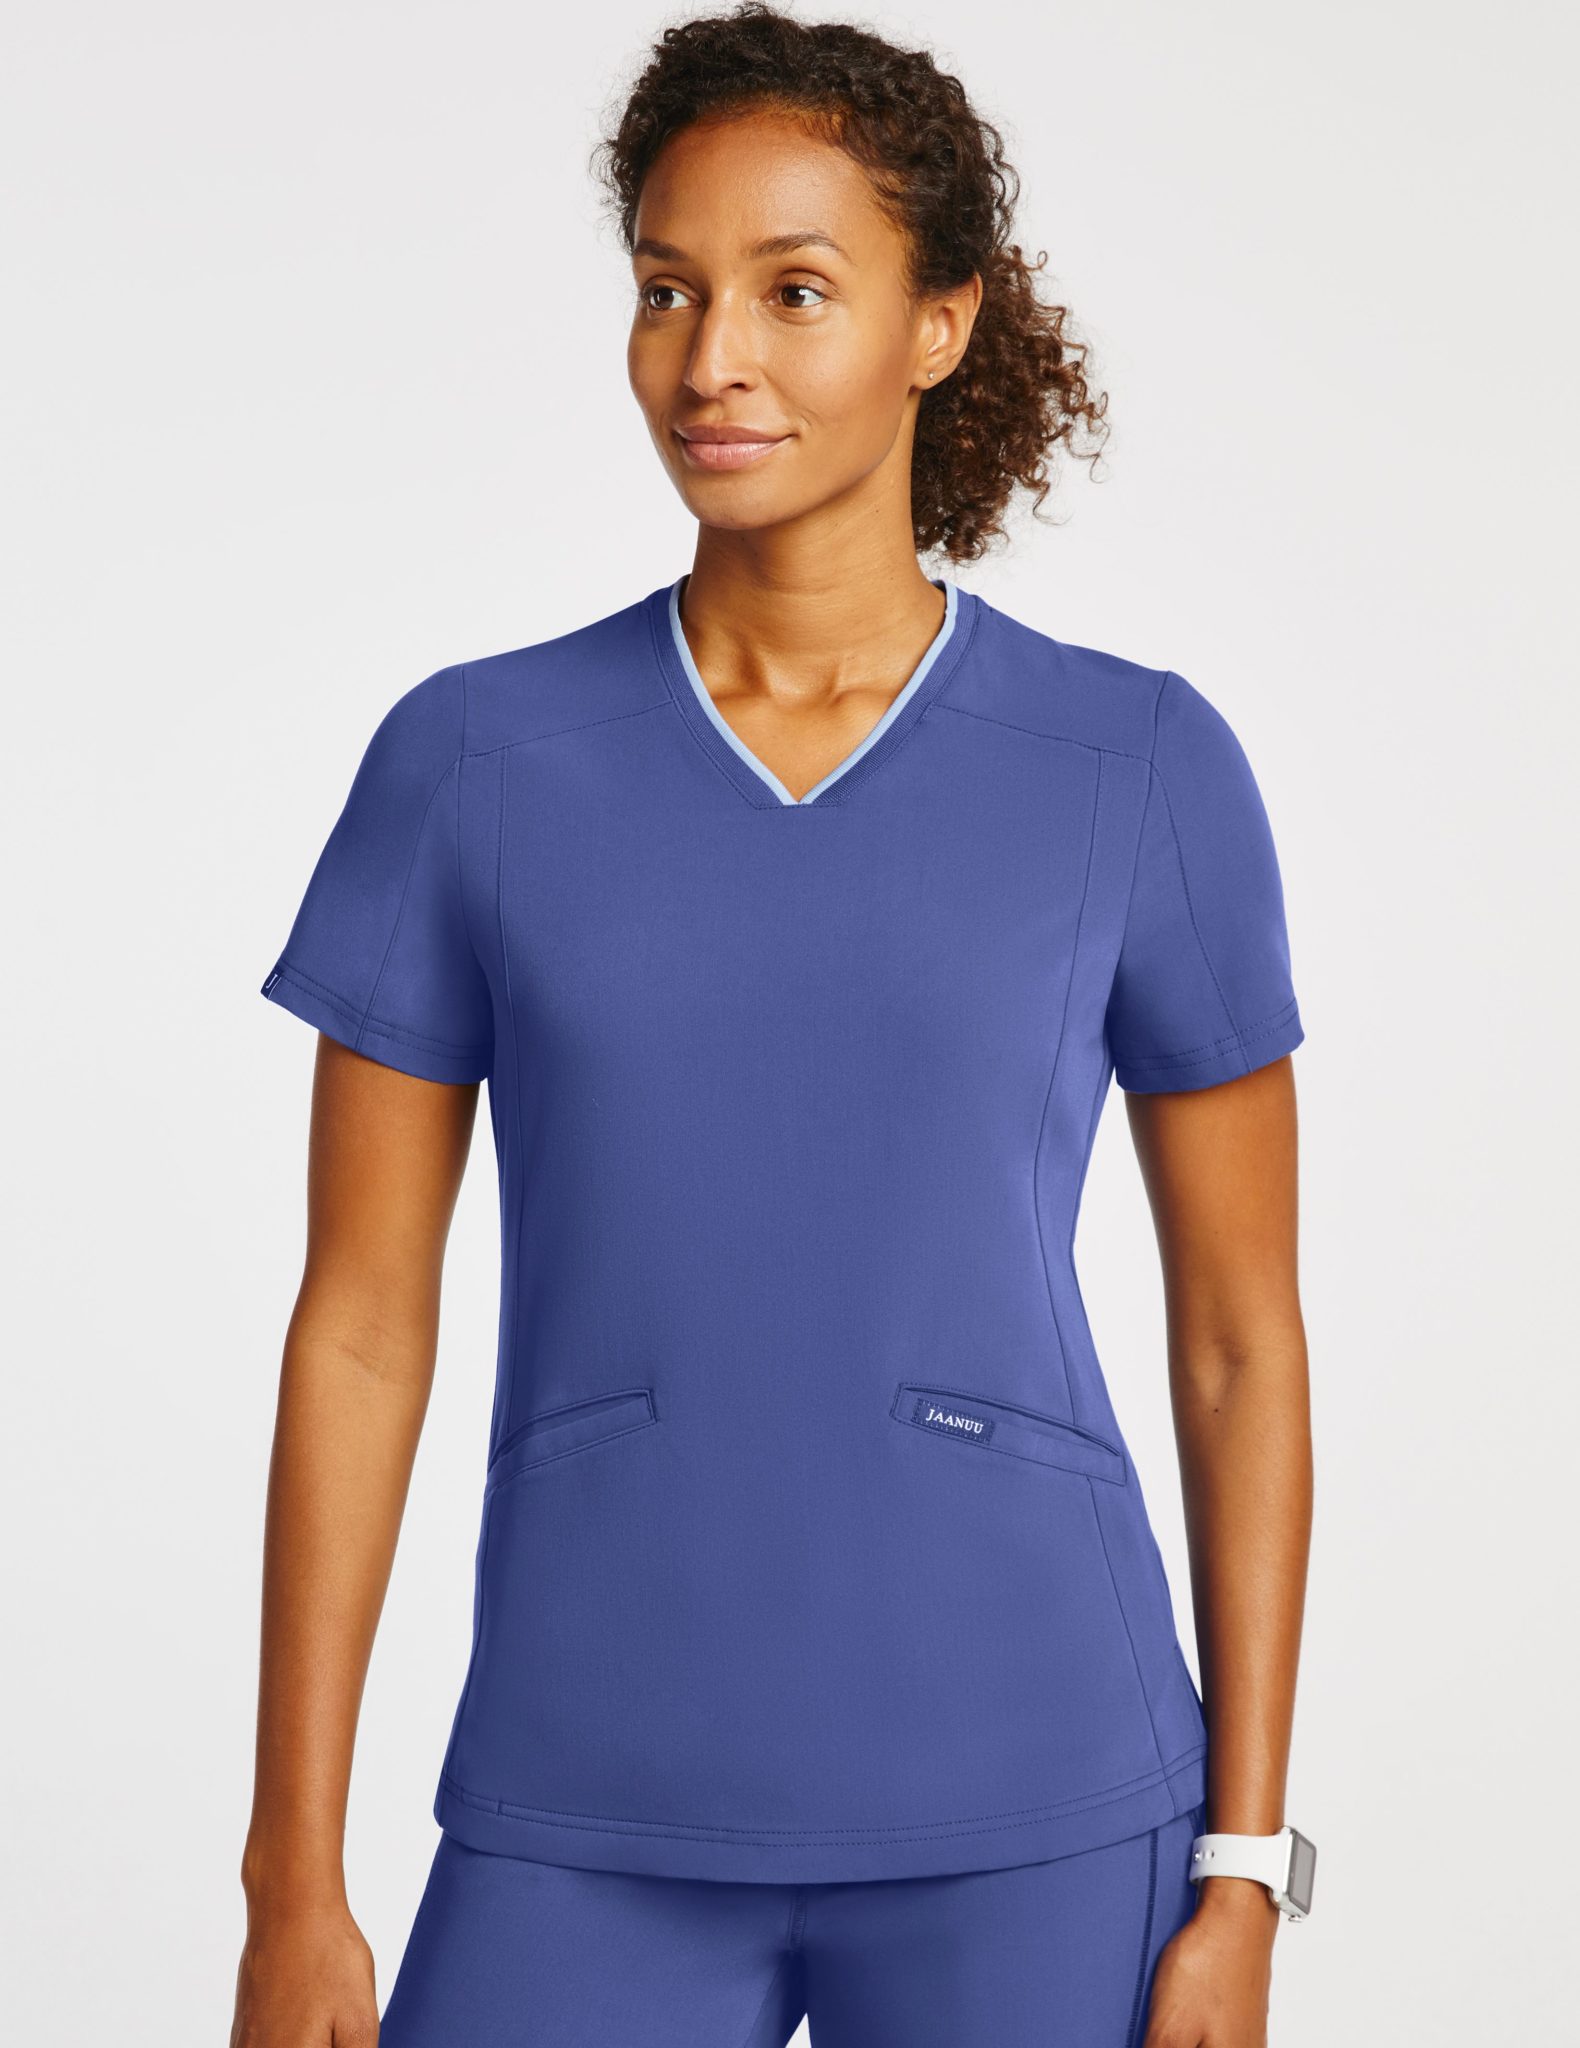 How To Clean Scrubs the Right Way To Deeply Wash and Disinfect Them